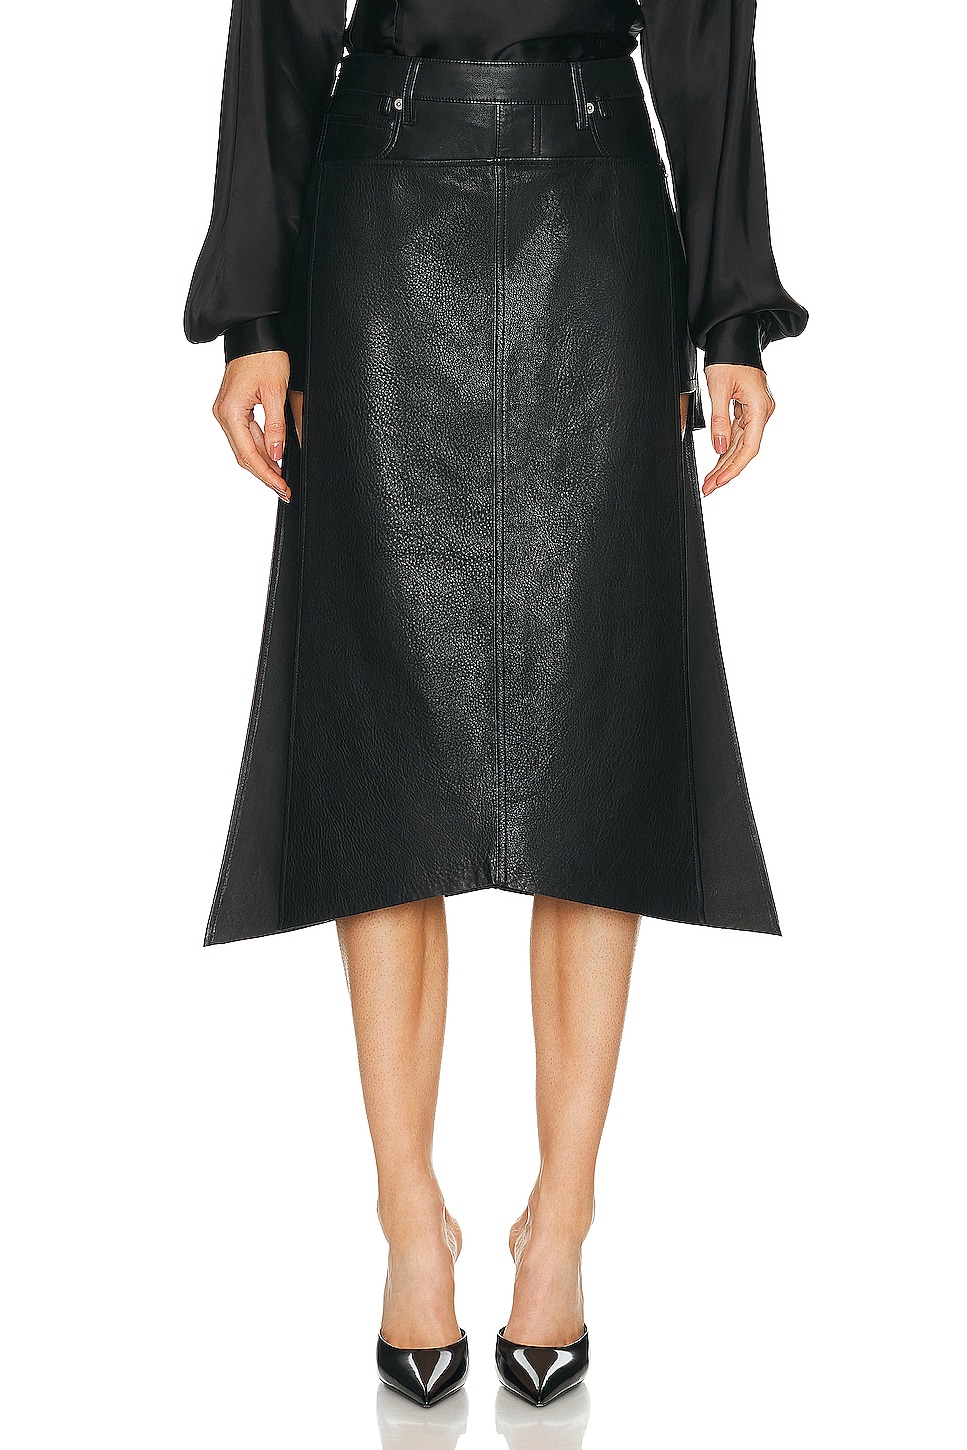 Image 1 of EZR Double Layer Skirt Short in Black